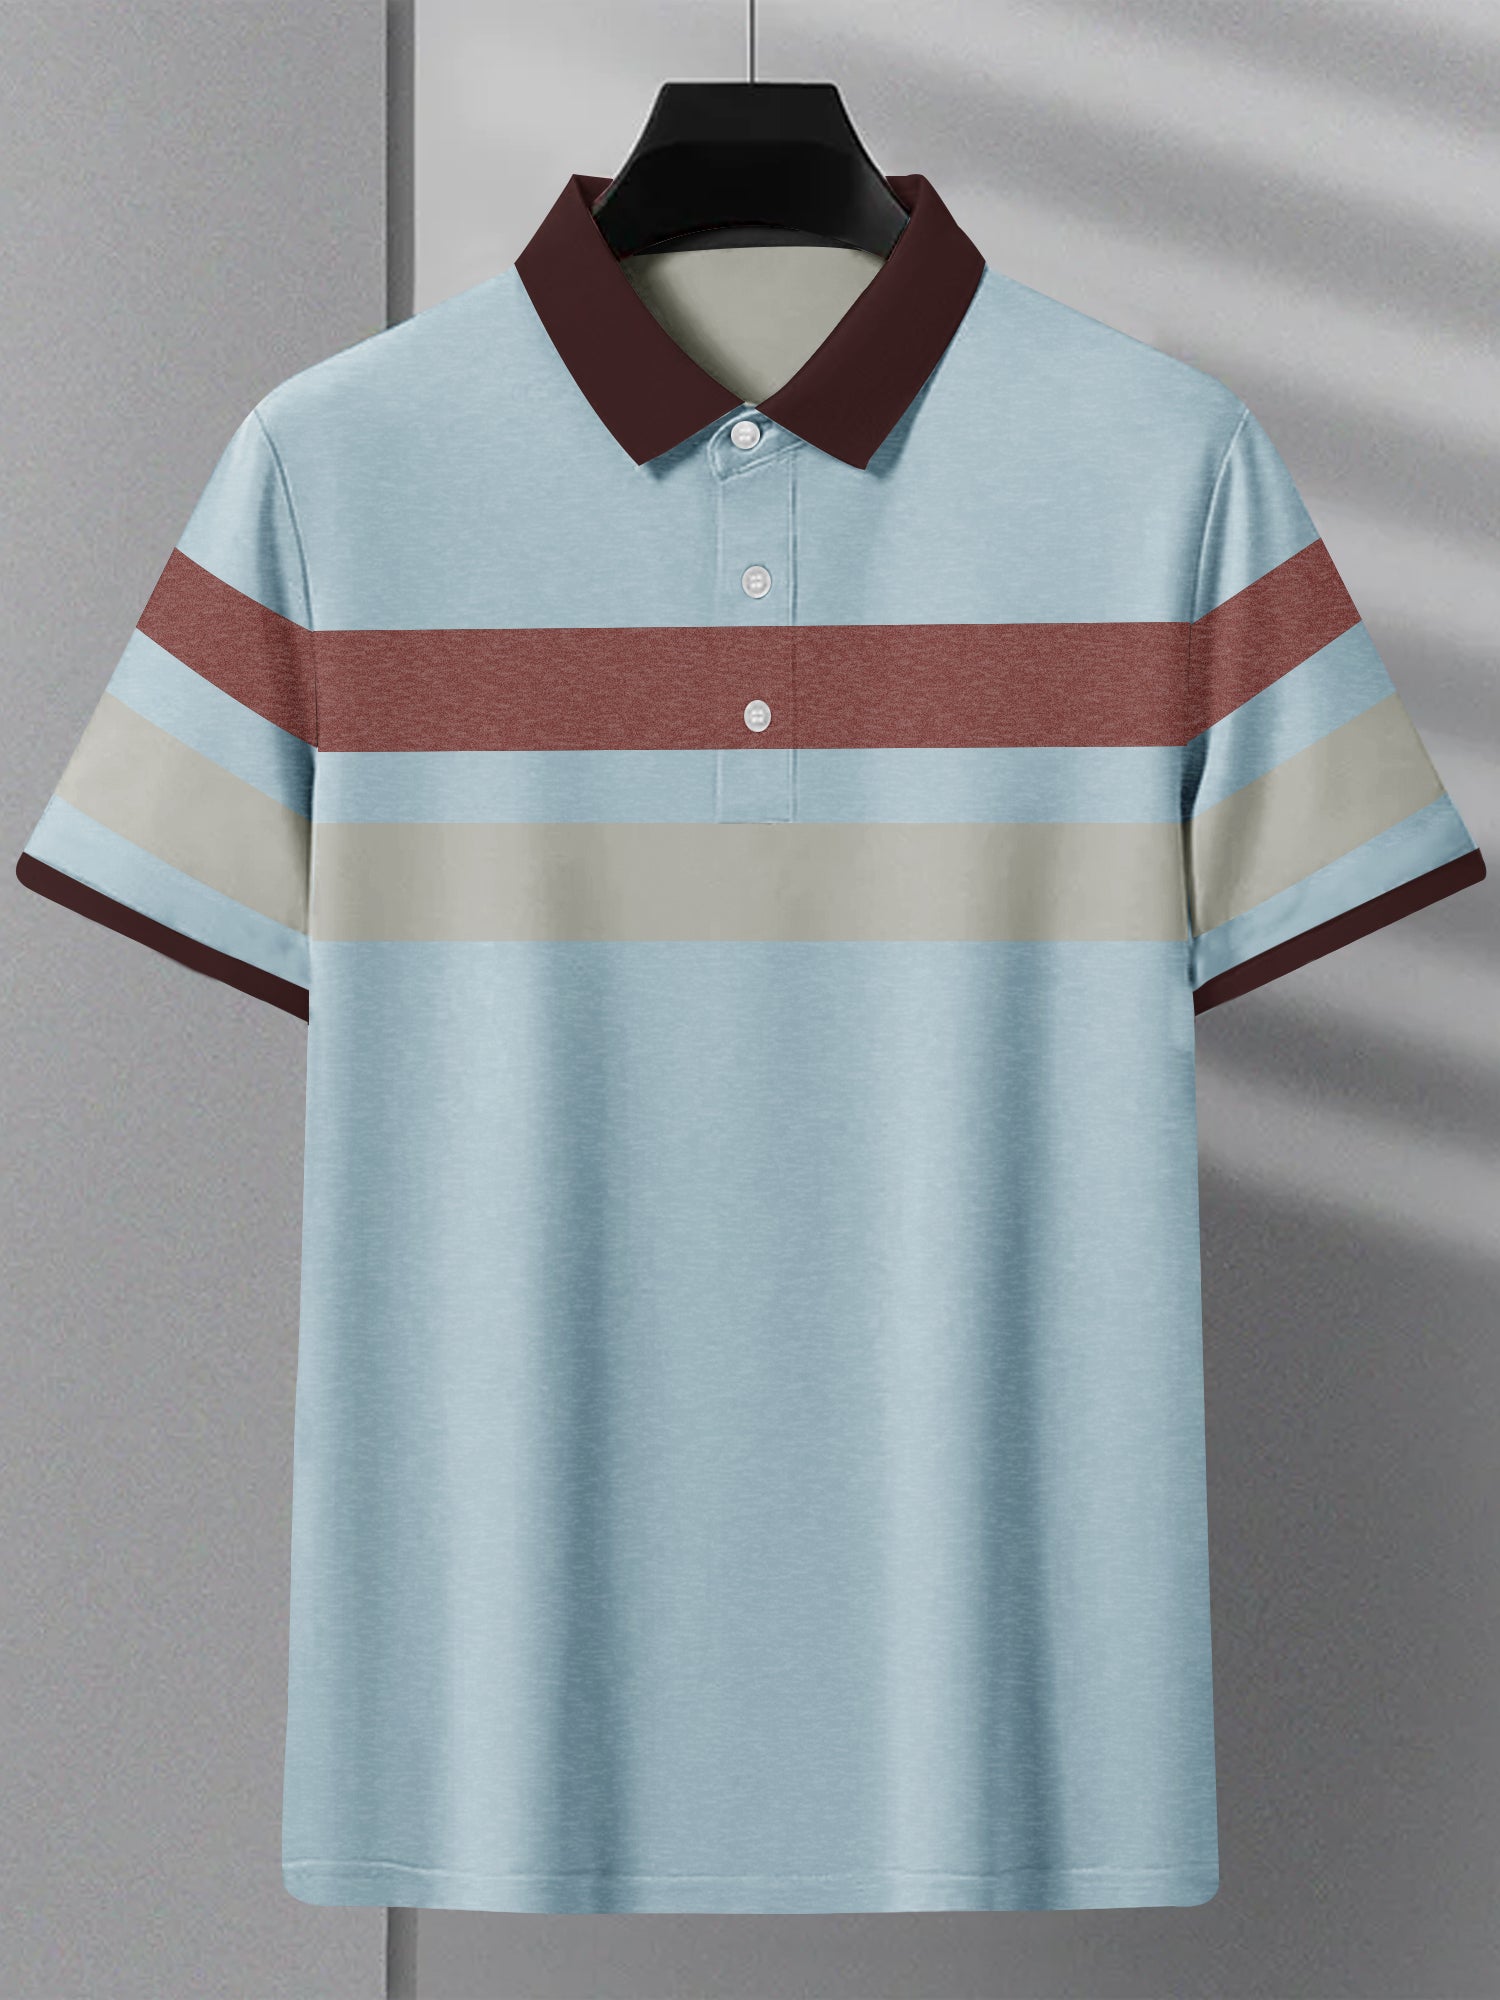 NXT Summer Polo Shirt For Men-Blue Melange with Maroon & Grey Stripe-SP1453/RT2341